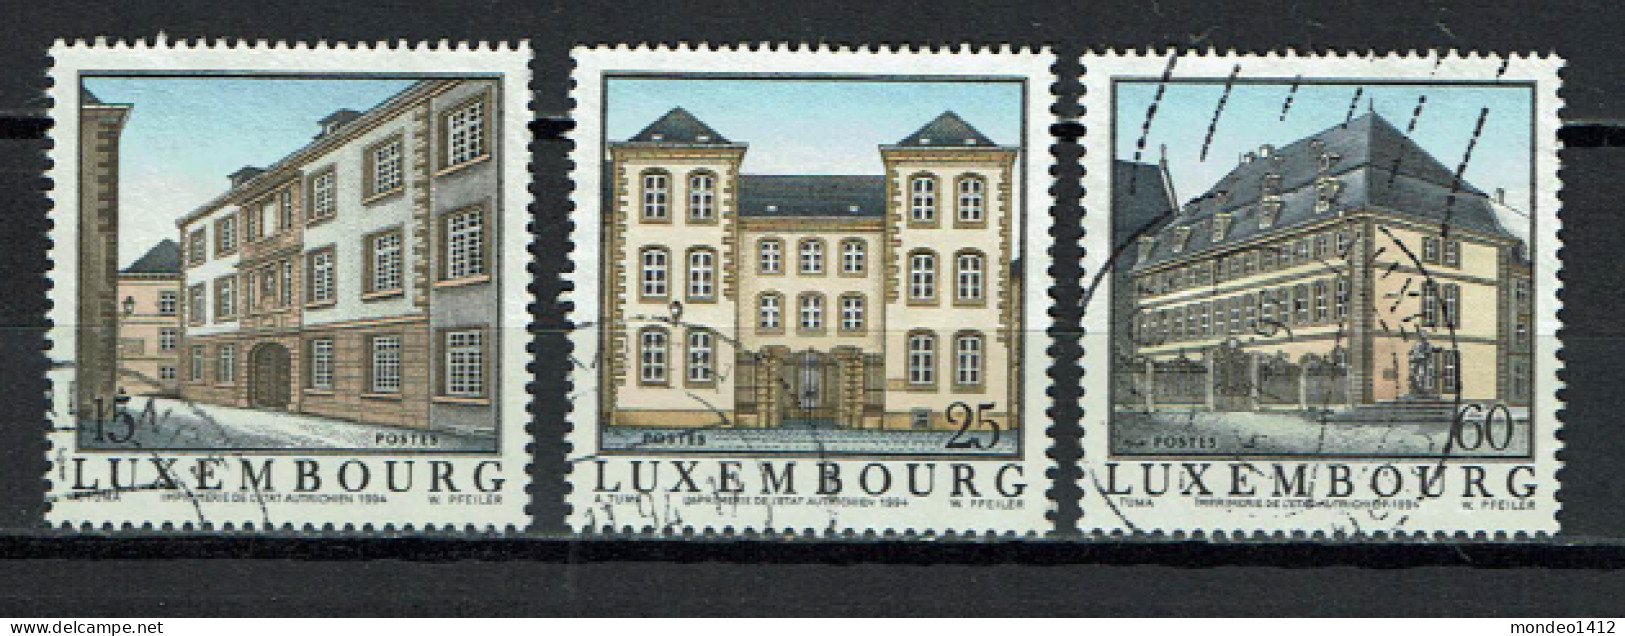 Luxembourg 1994 - YT 1300/1302 - Former Refugees In Luxembourg, Anciens Refuges - Usados